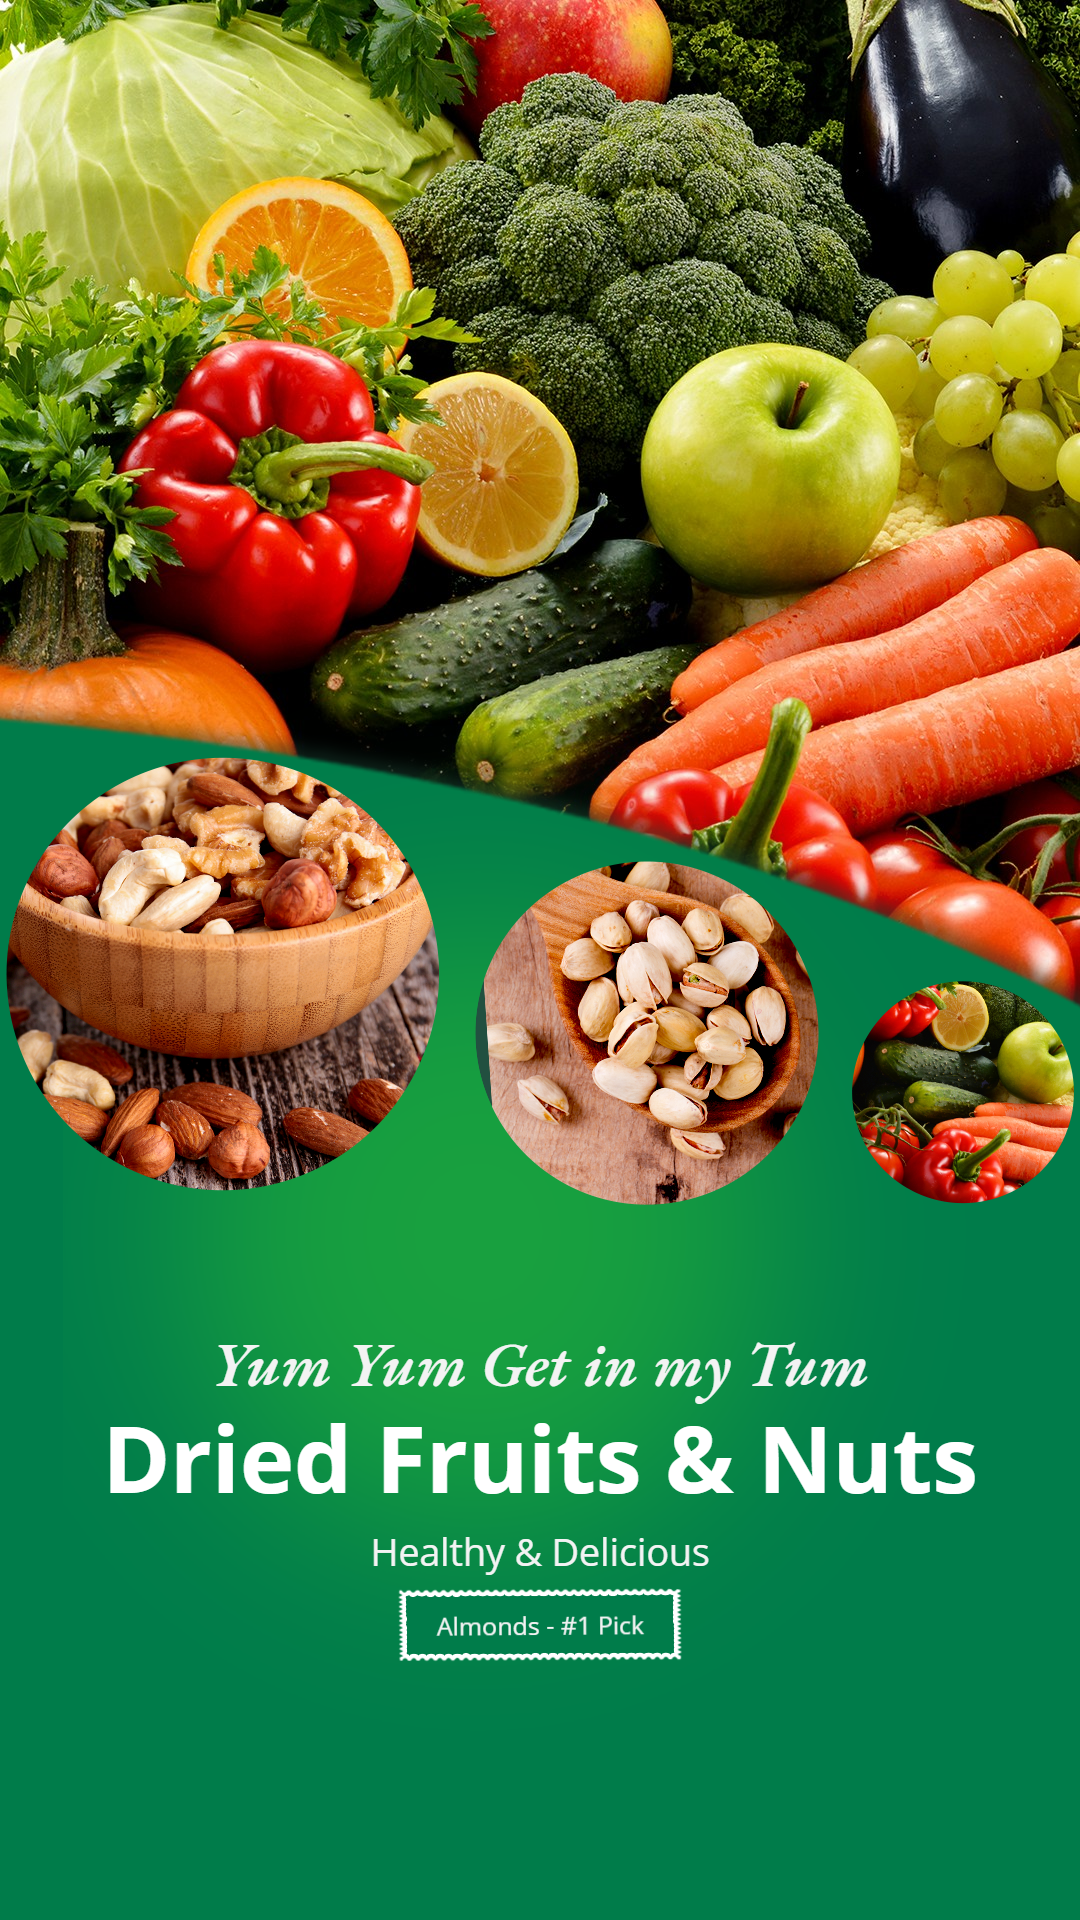 Nuts and Dried Fruit Wholesale Promotion Ecommerce Story预览效果